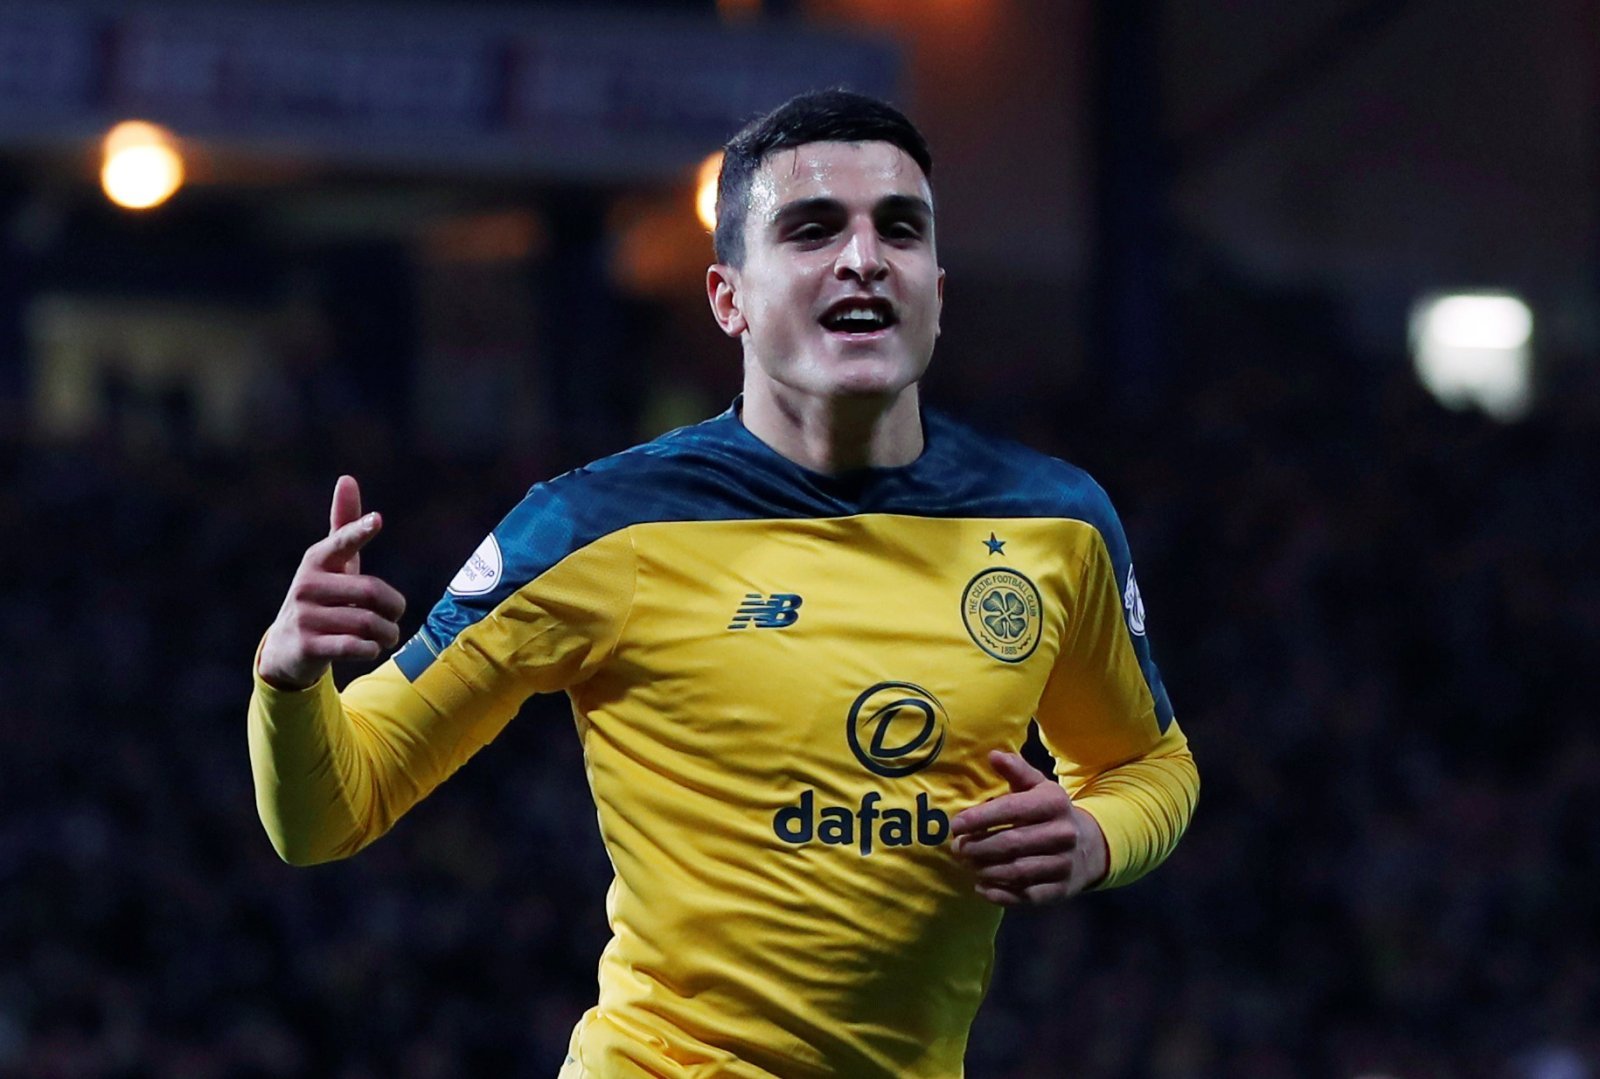 Celtic: Mohamed Elyounoussi thriving after torrid Southampton spell